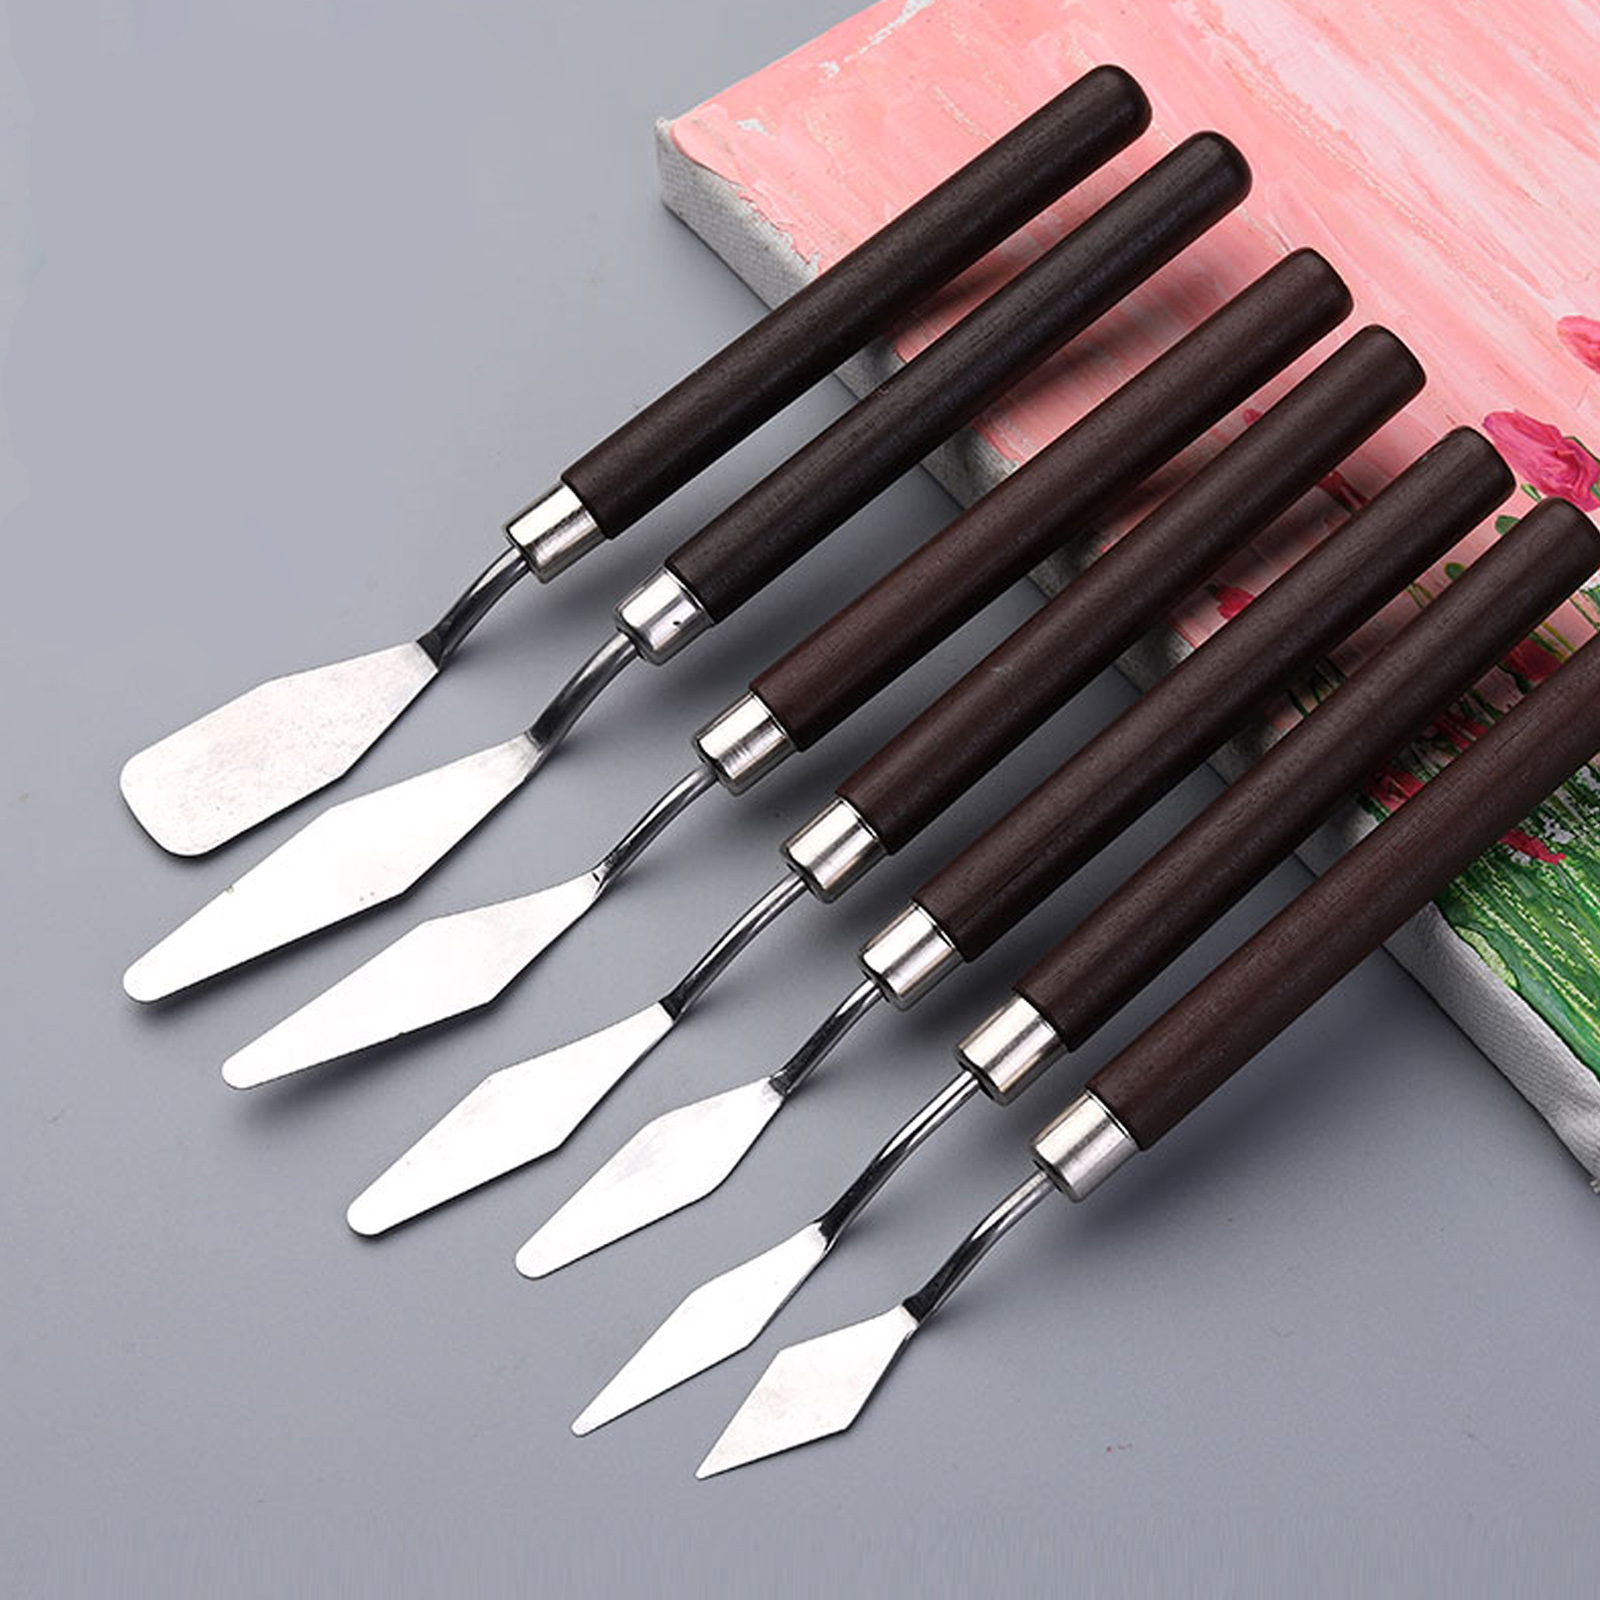 Incraftables Stainless Steel Palette Knife Set (11pcs). Art Palette Knife  for Acrylic Painting. Best Palette Knives for Cake Decorating & DIY Crafts.  Paint Spatula for Beginner, Pros, Kids & Adults